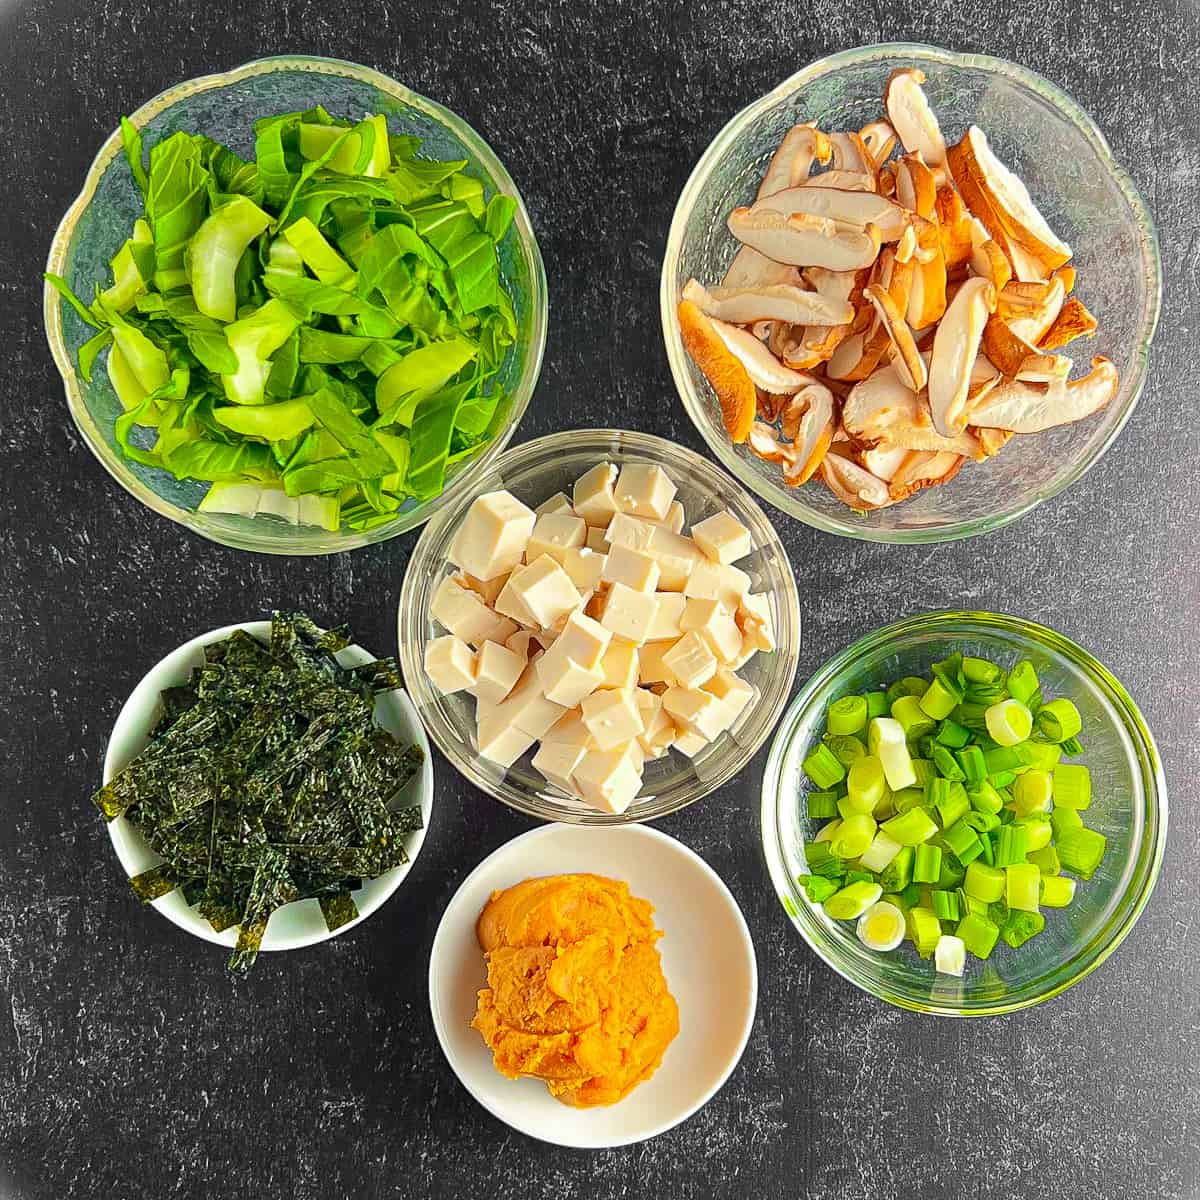 top view of the ingredients for miso soup against a black and gray background: mushrooms, tofu, green onion, miso paste, nori seaweed, baby bok choy